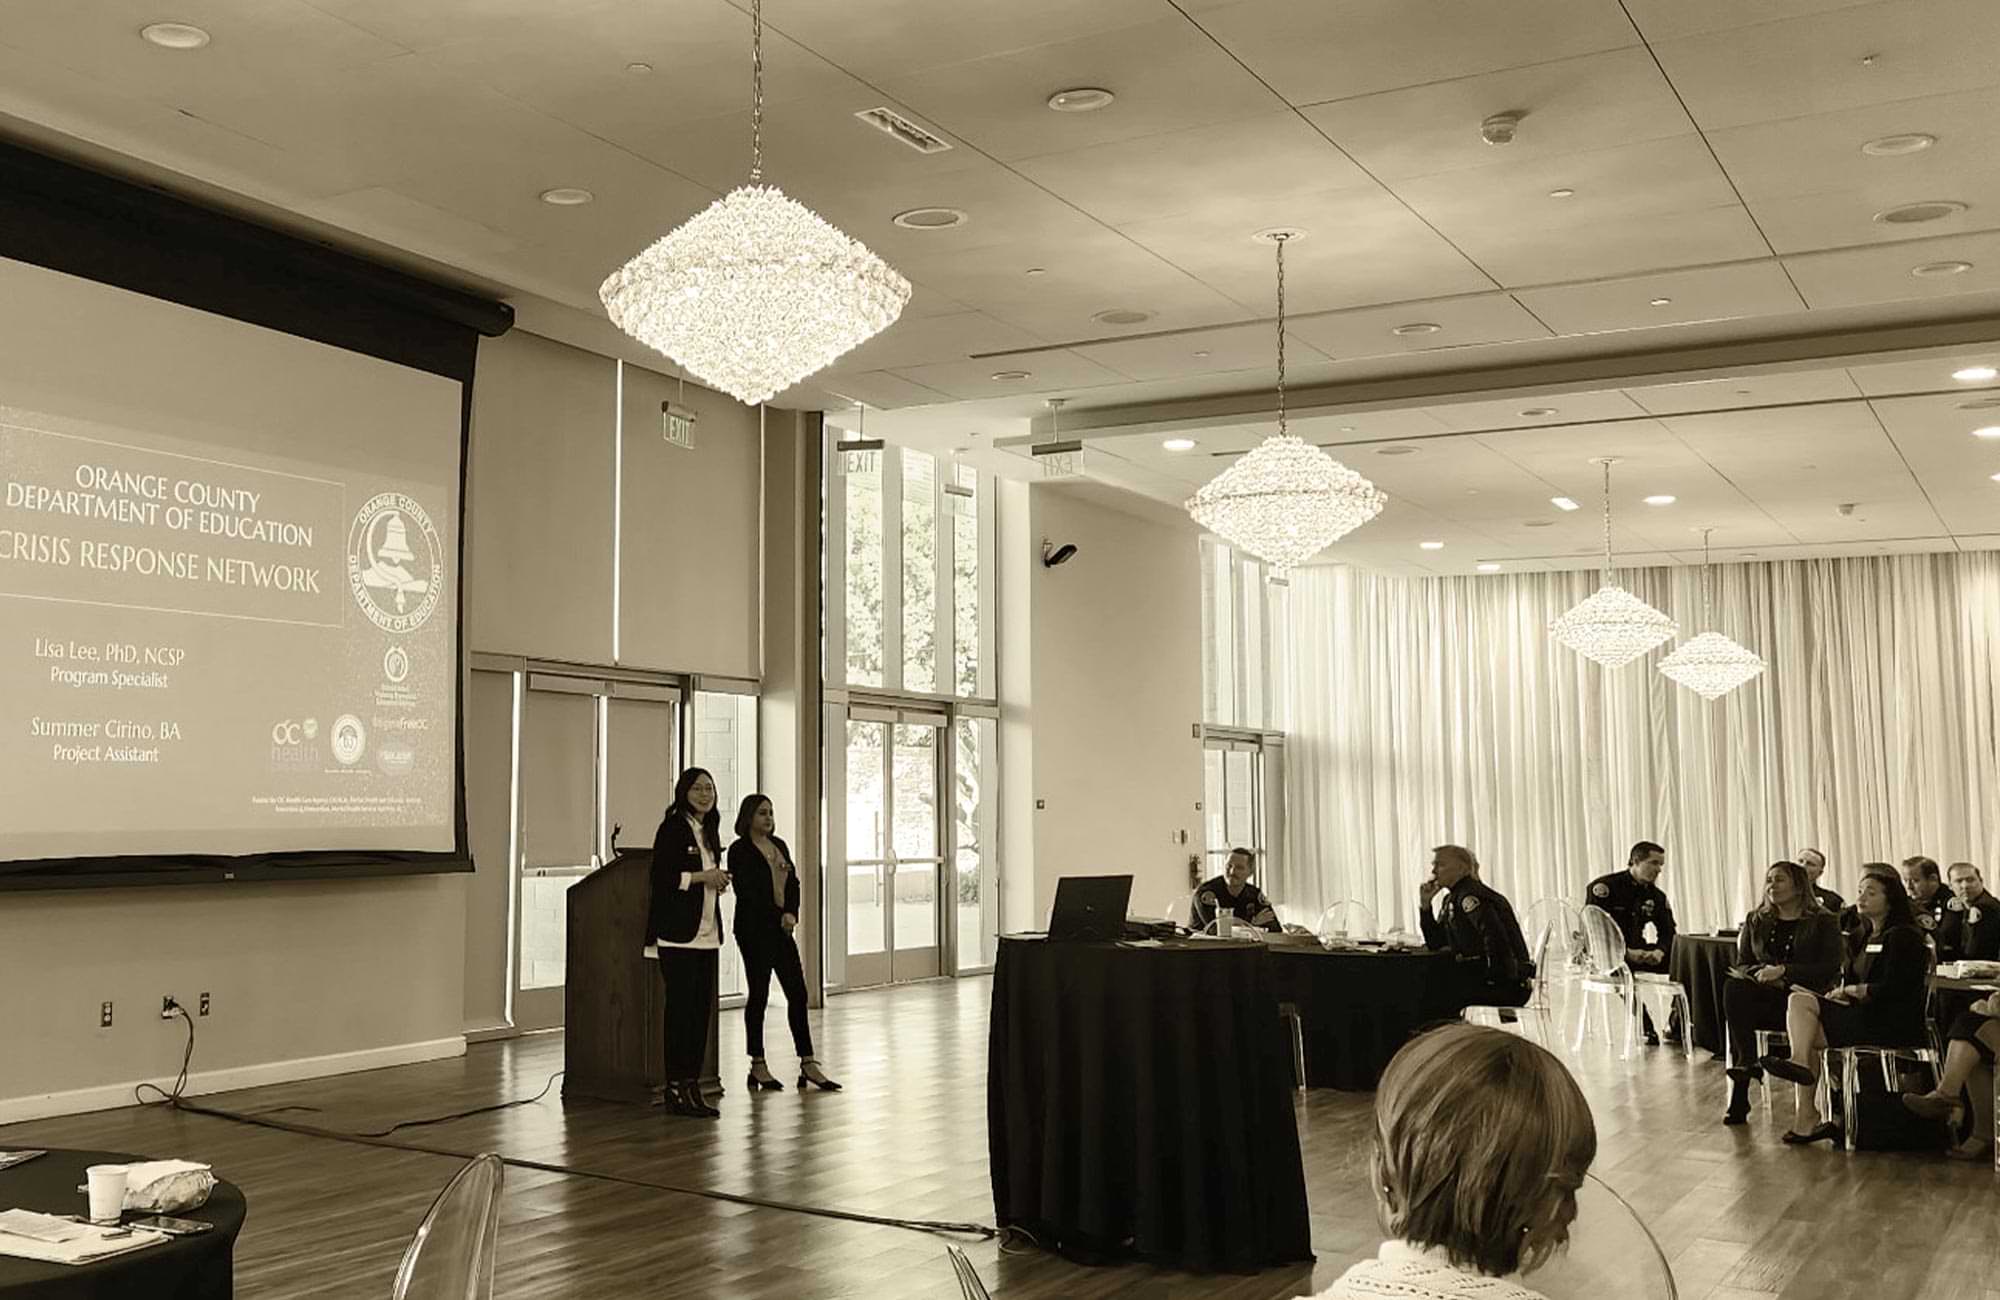 two women stand by a podium addressing a large audience at a Crisis Response Network meeting